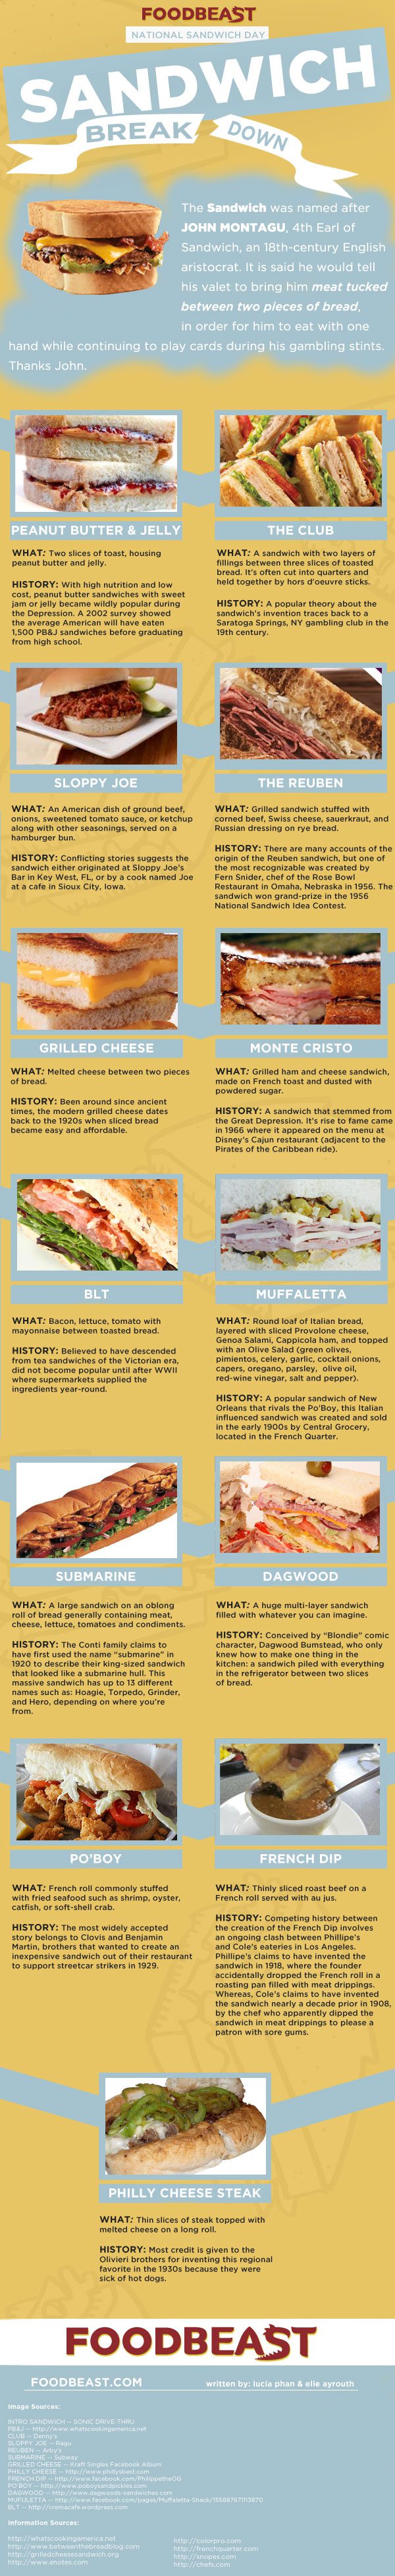 Most Popular Types of Sandwiches